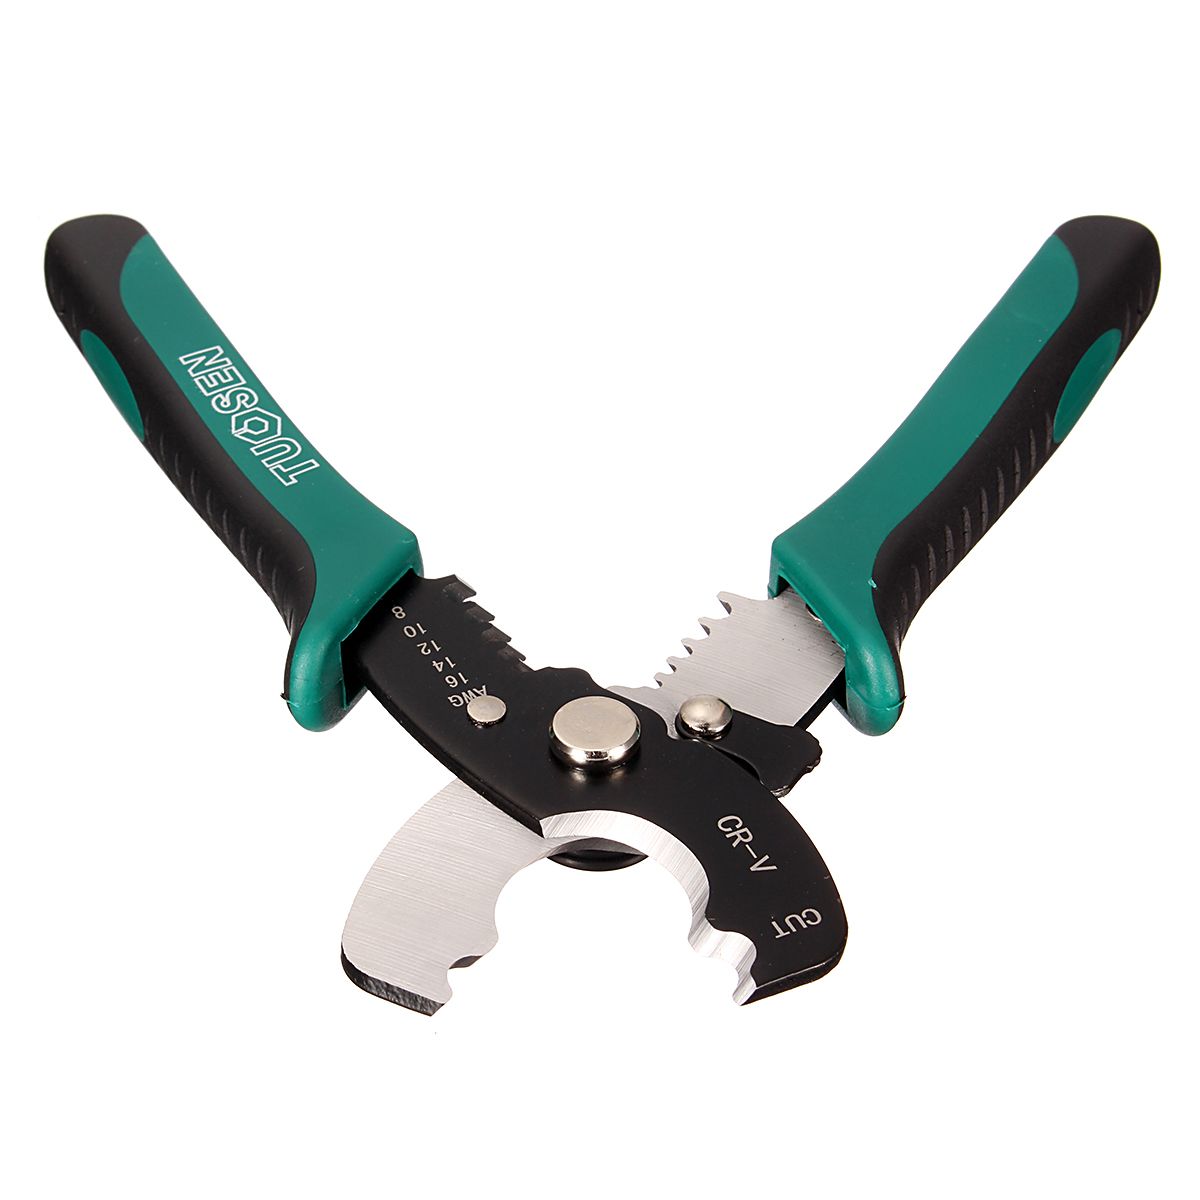 TUOSEN-8inch-Wire-Stripper-Cable-Cutting-Scissor-Stripping-Pliers-Cutter-16-40mm-Hand-Tools-1122936